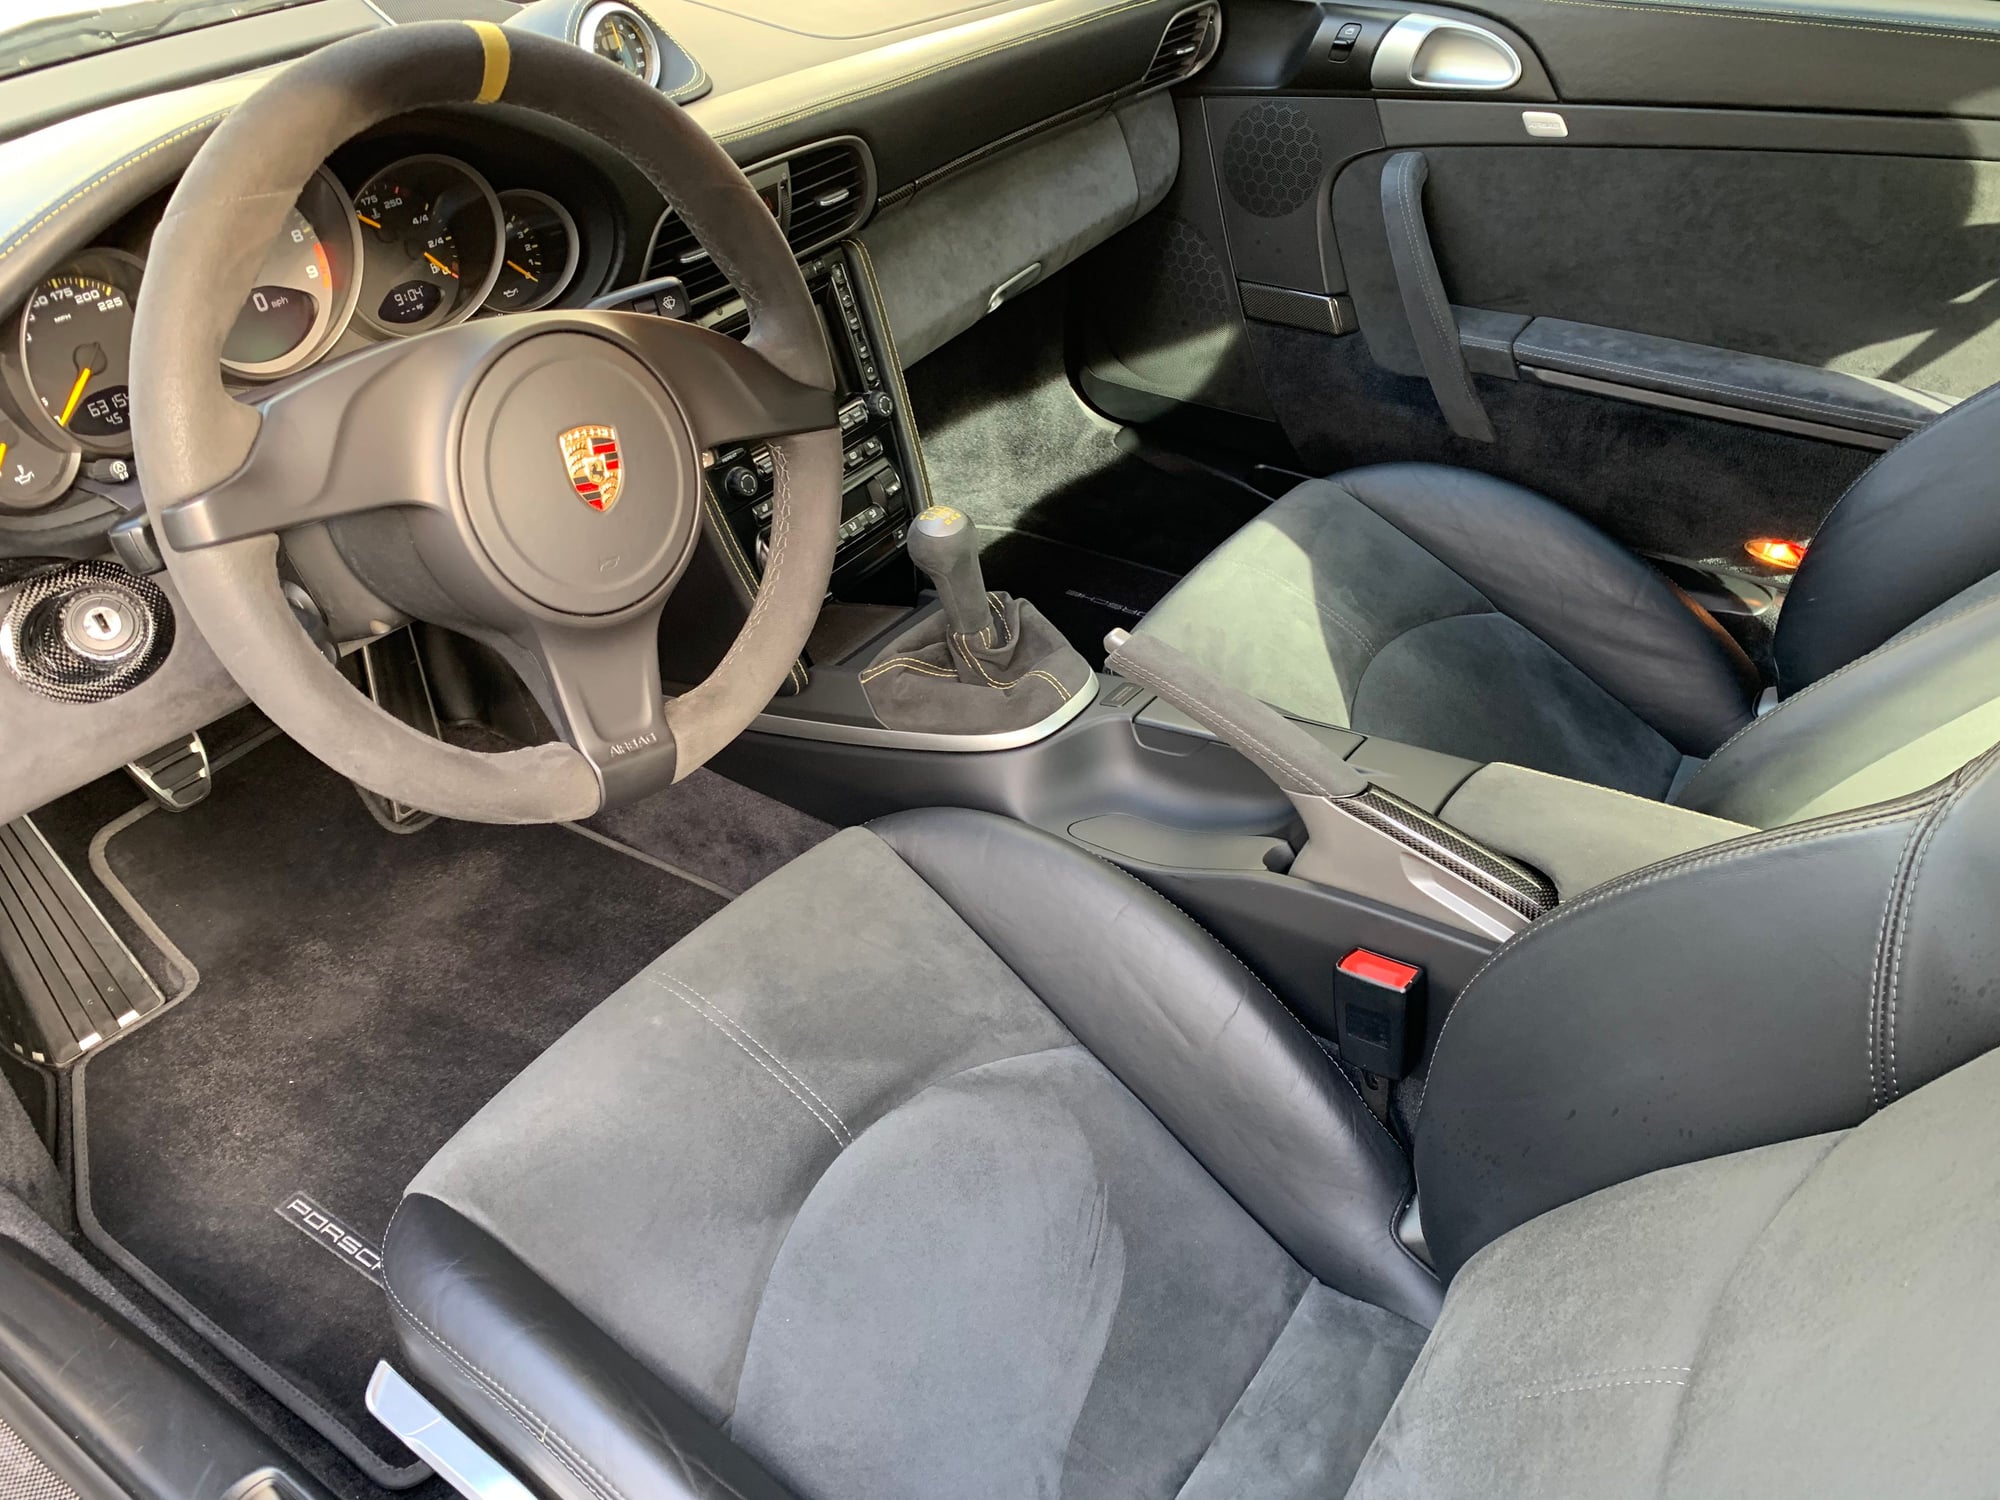 2007 Porsche GT3 - 07 GT3 - GT Silver - Used - VIN Wp0ac29927s792417 - 64,500 Miles - West Hollywood, CA 90046, United States